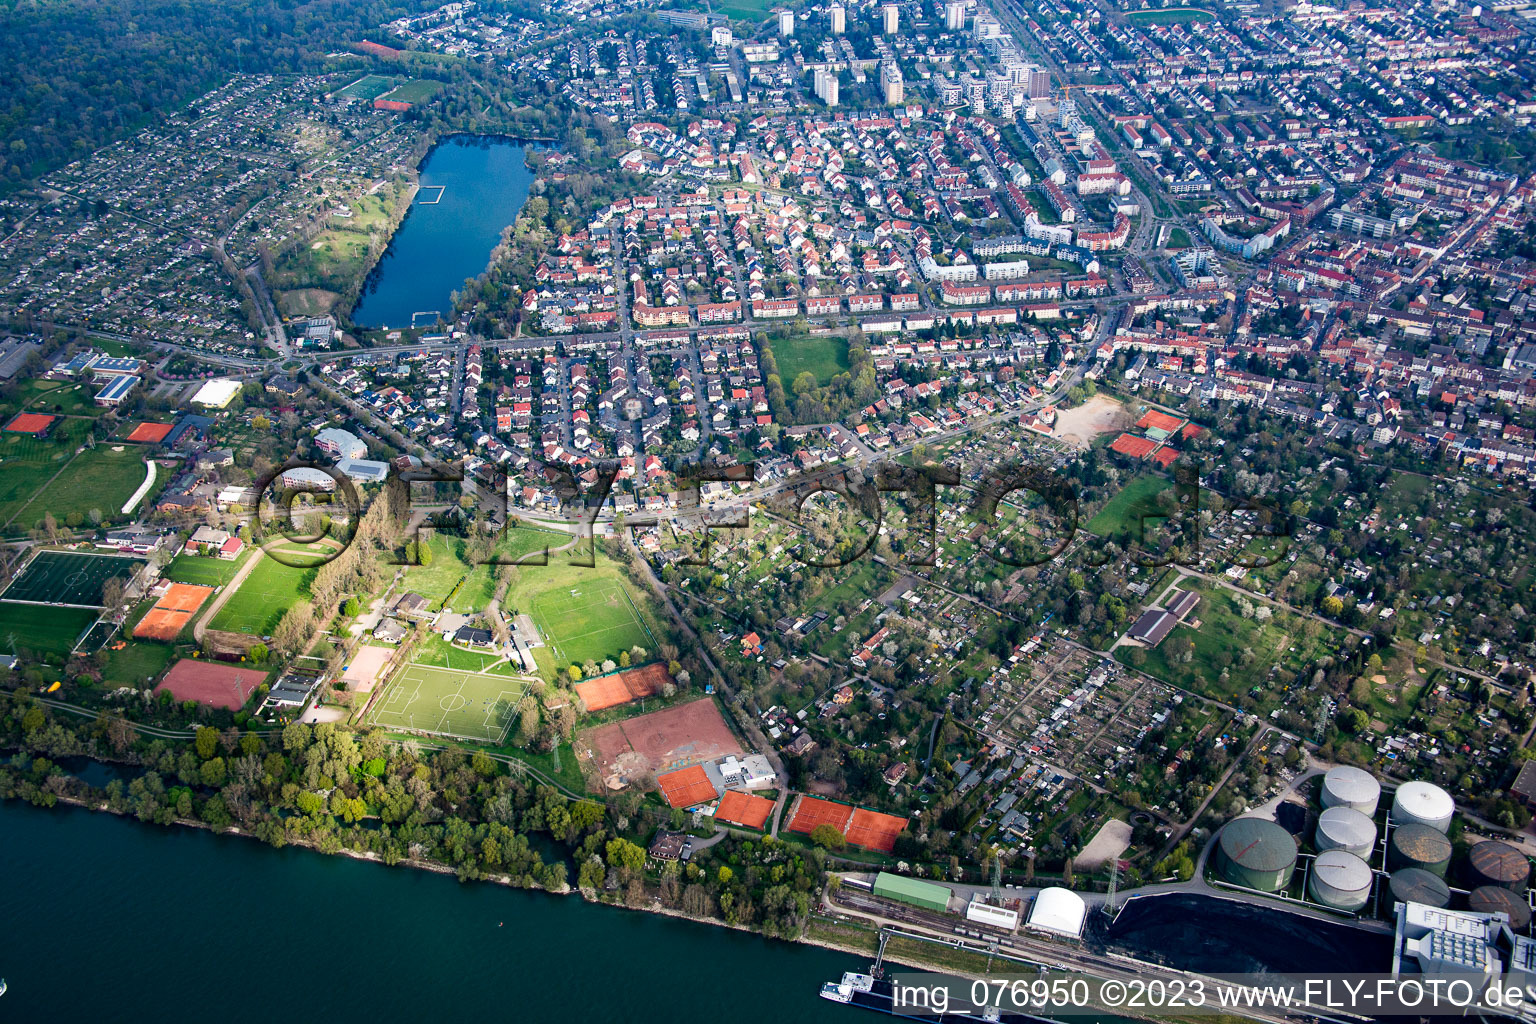 Sports facilities VfL Kurpfalz in the district Neckarau in Mannheim in the state Baden-Wuerttemberg, Germany